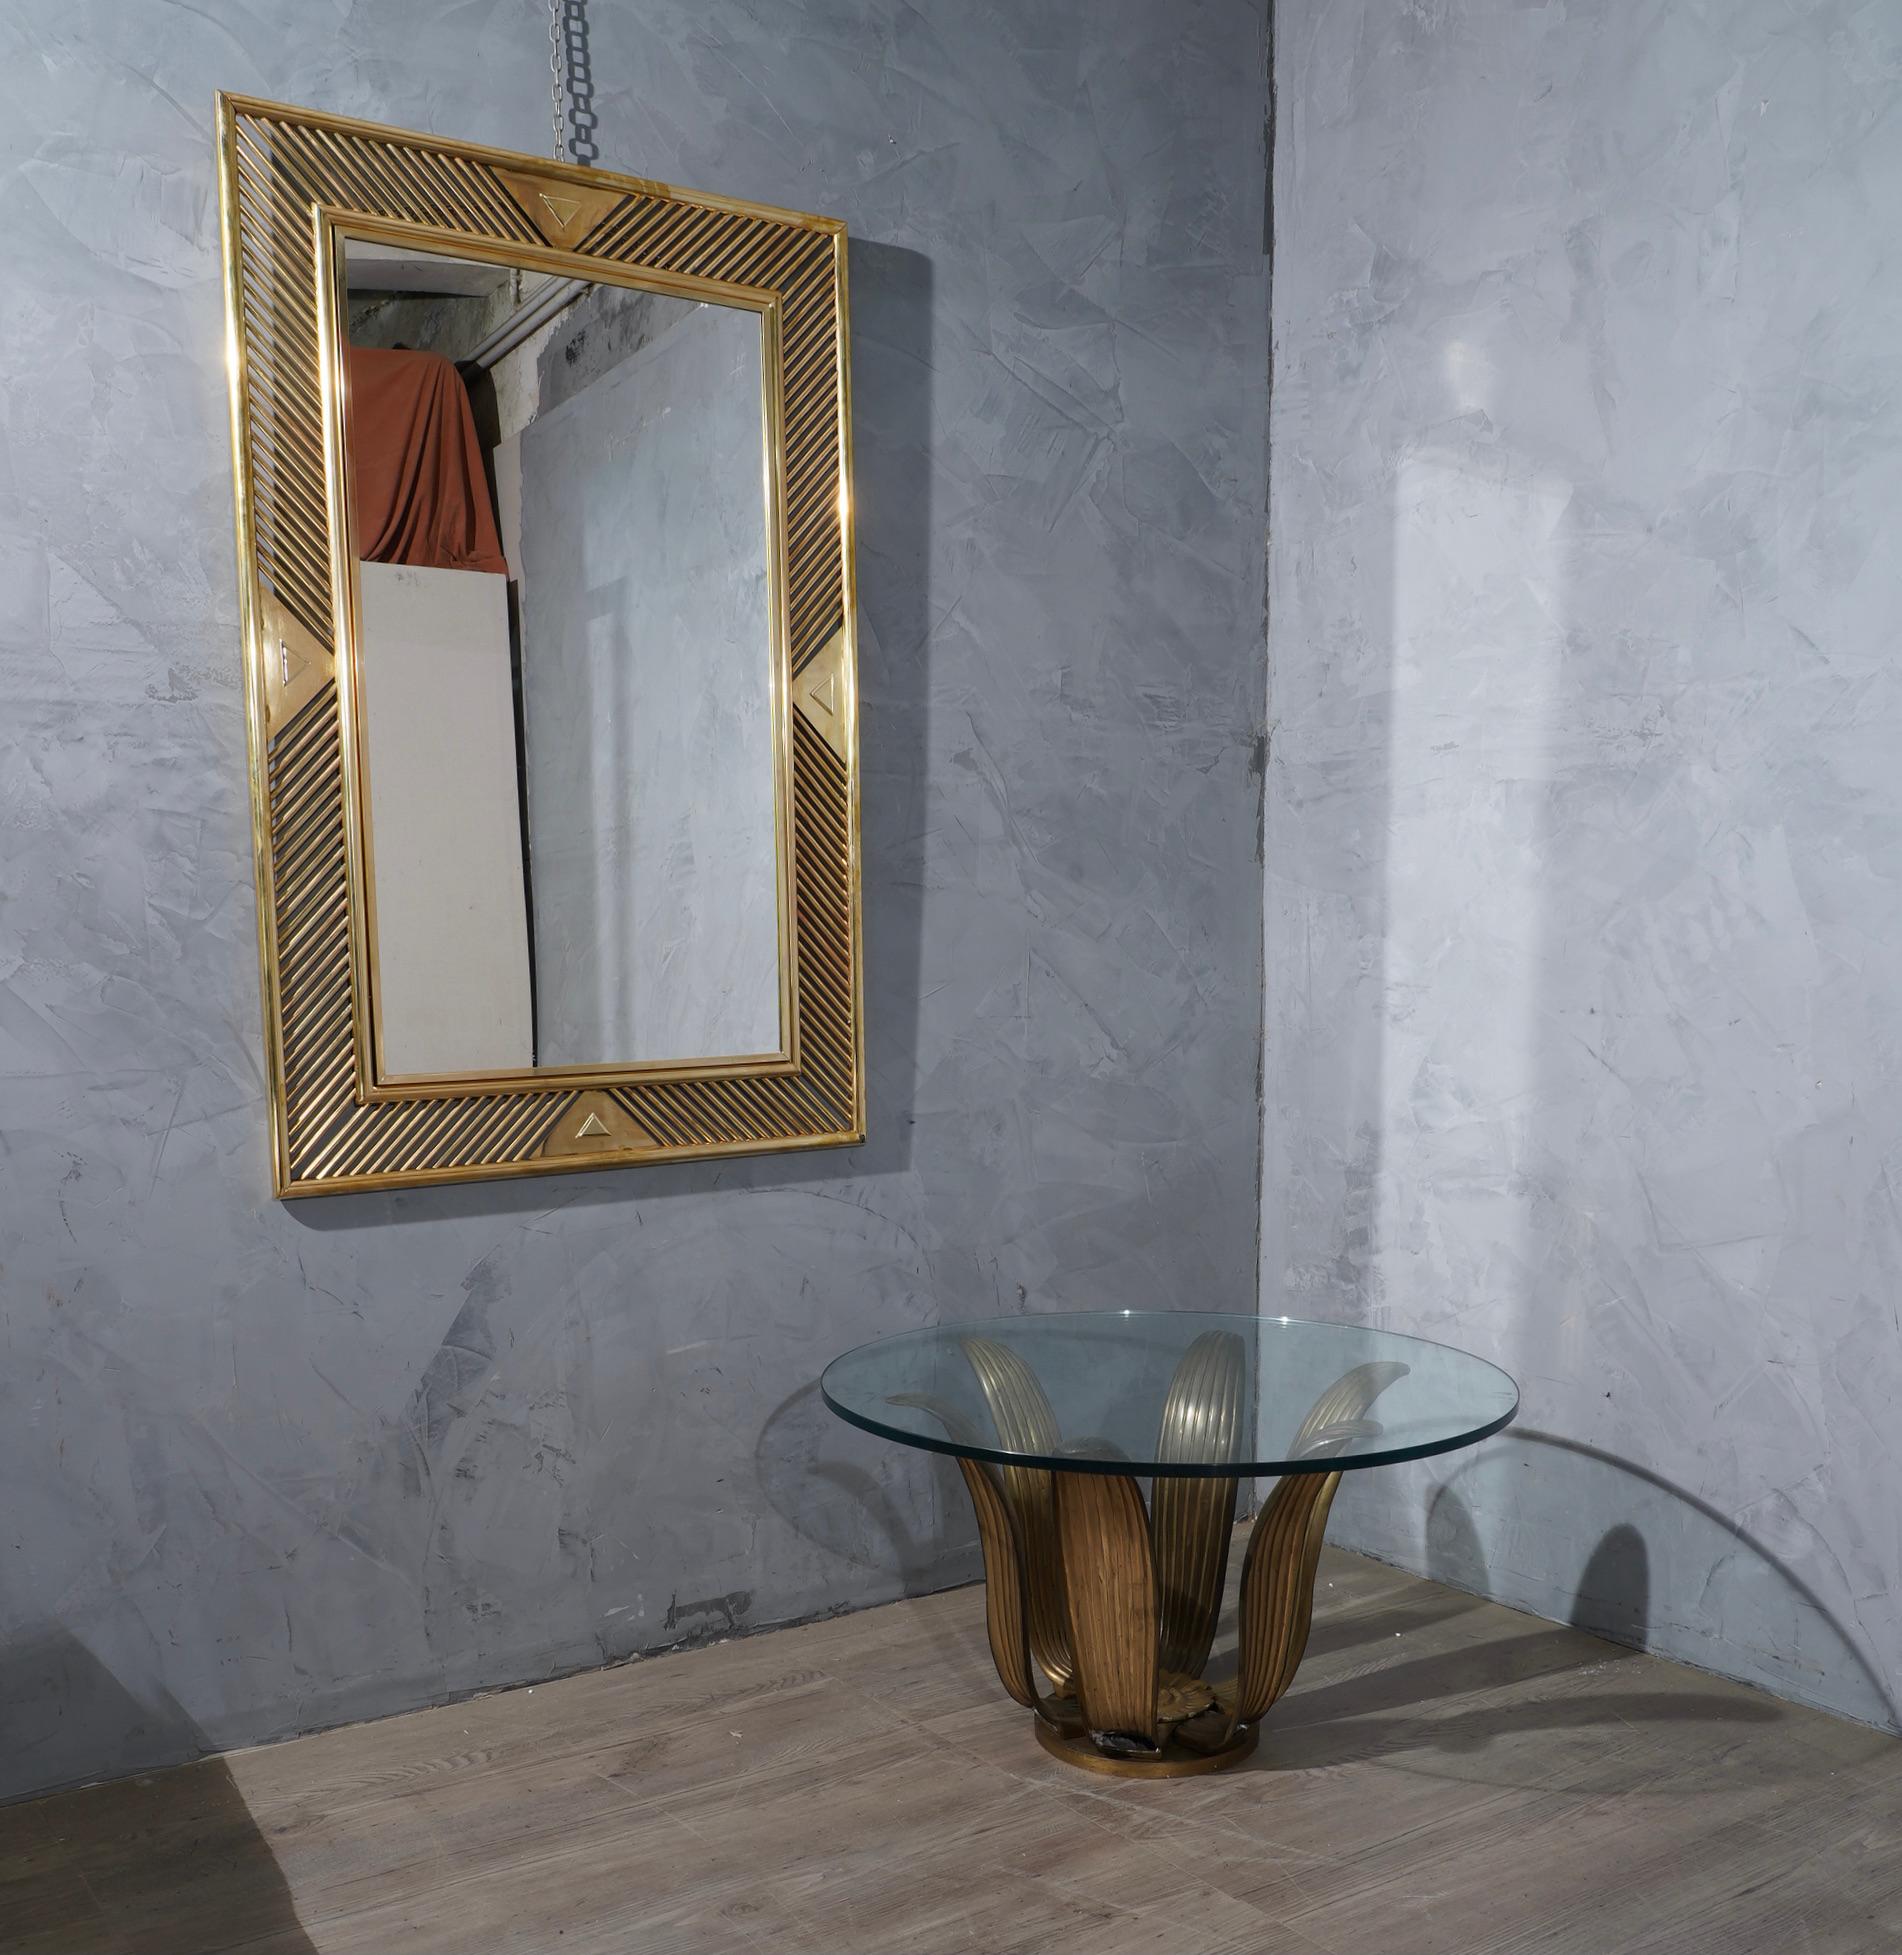 Particular design for these frames, all in brass, with an artistic and refined taste. For those who love the color of the most precious metal.

The mirror is rectangular in shape, it can be mounted both vertically and horizontally, it is made up of